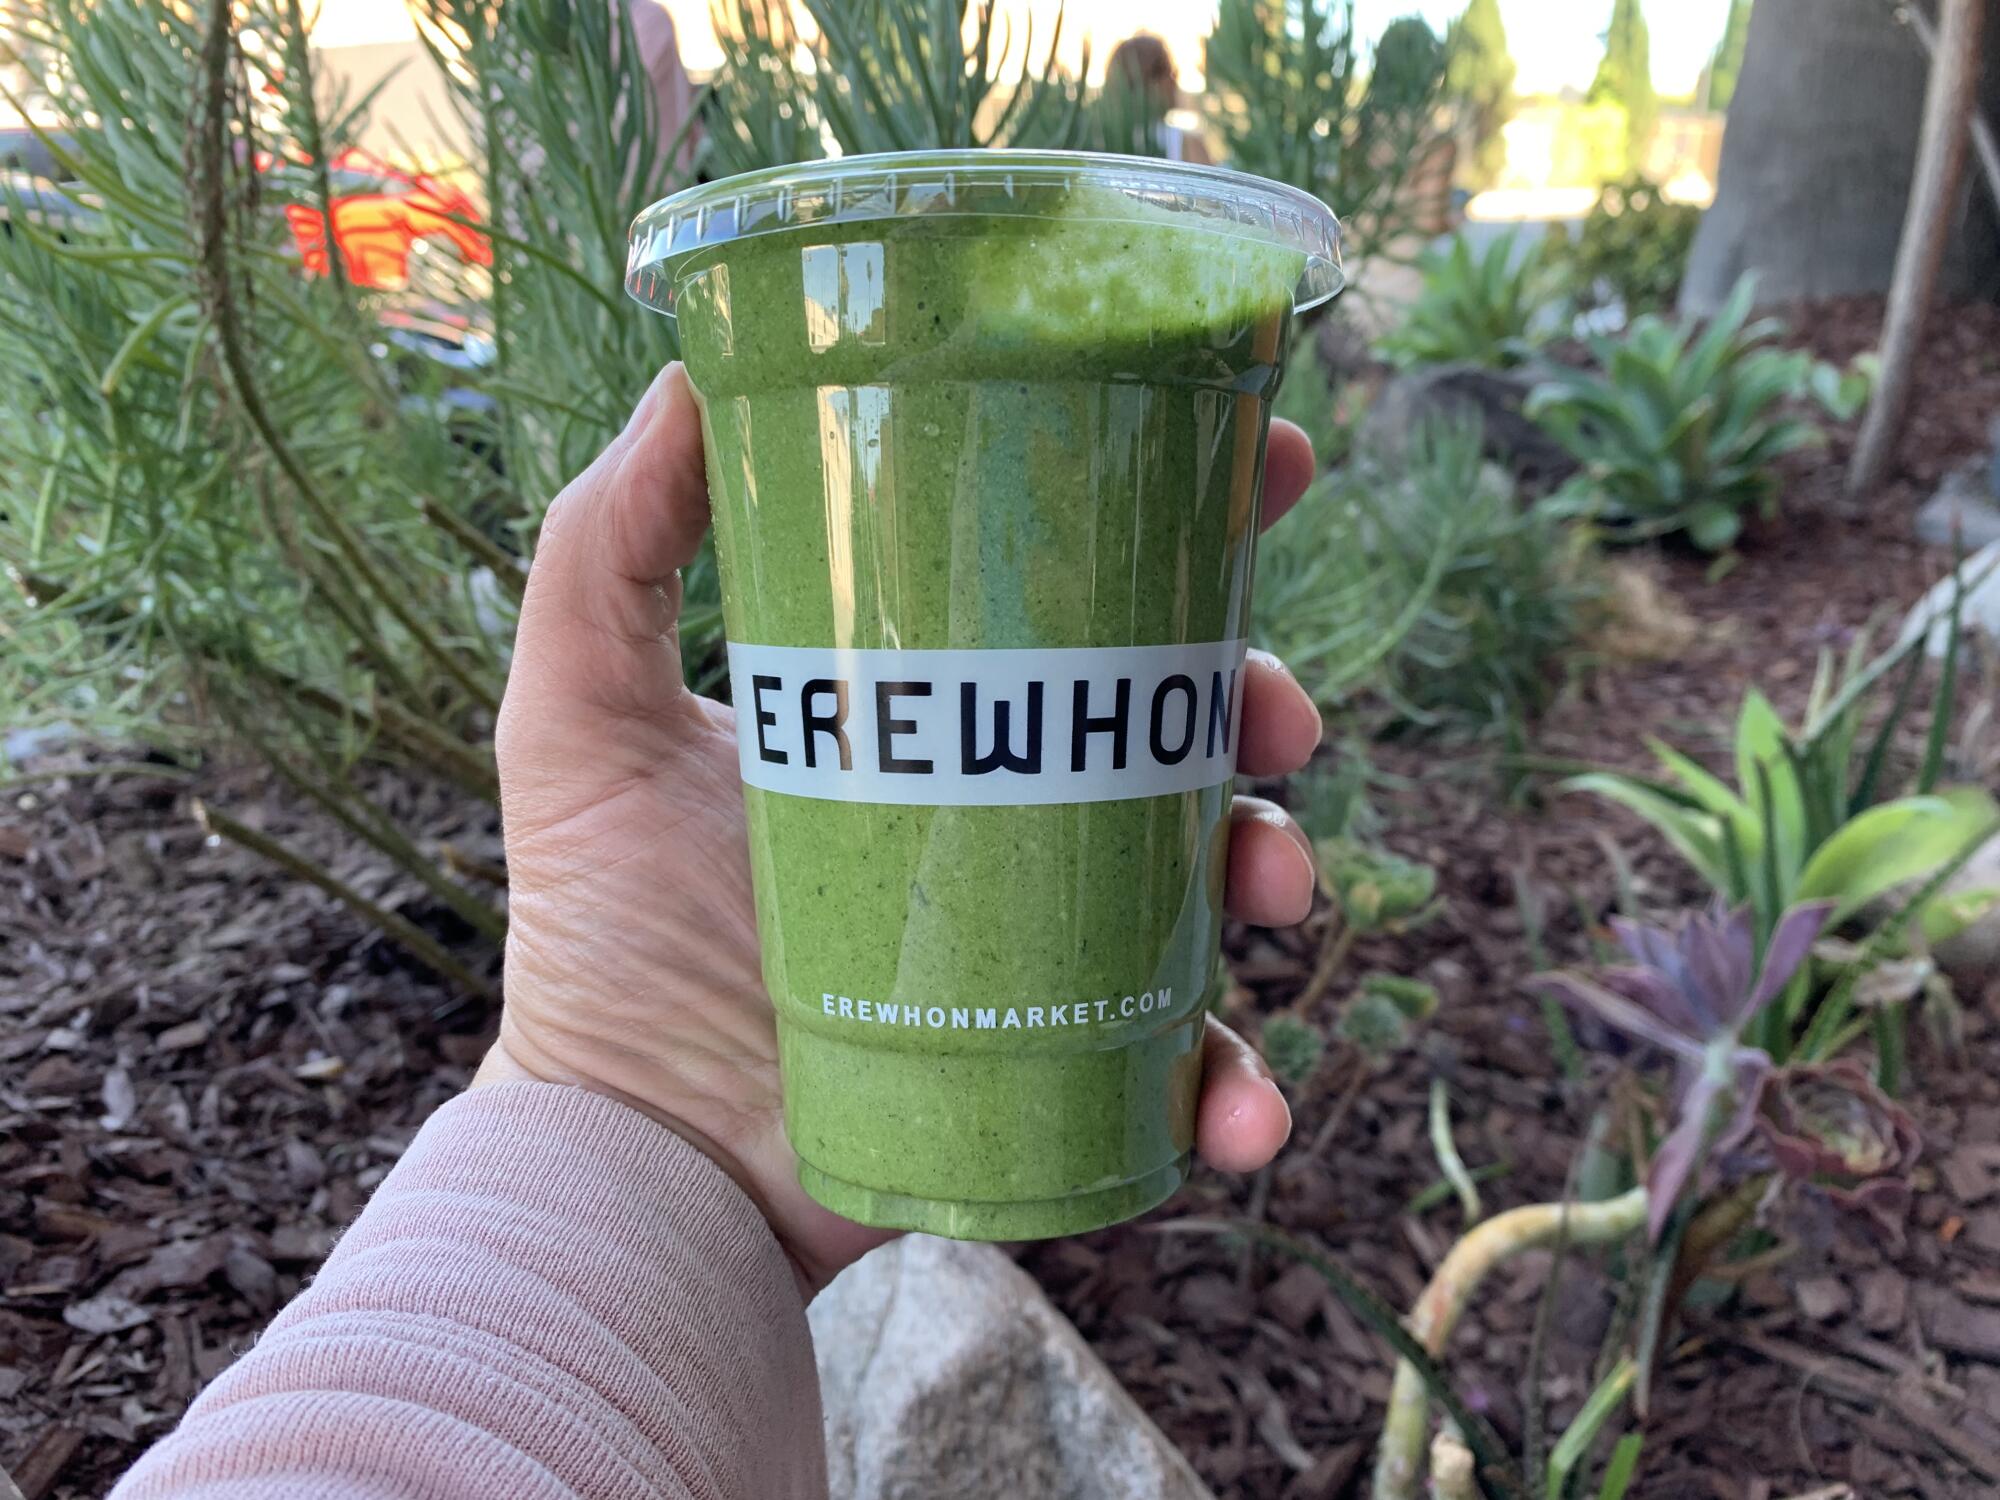 A hand holds a green smoothie in a plastic cup that says Erewhon.